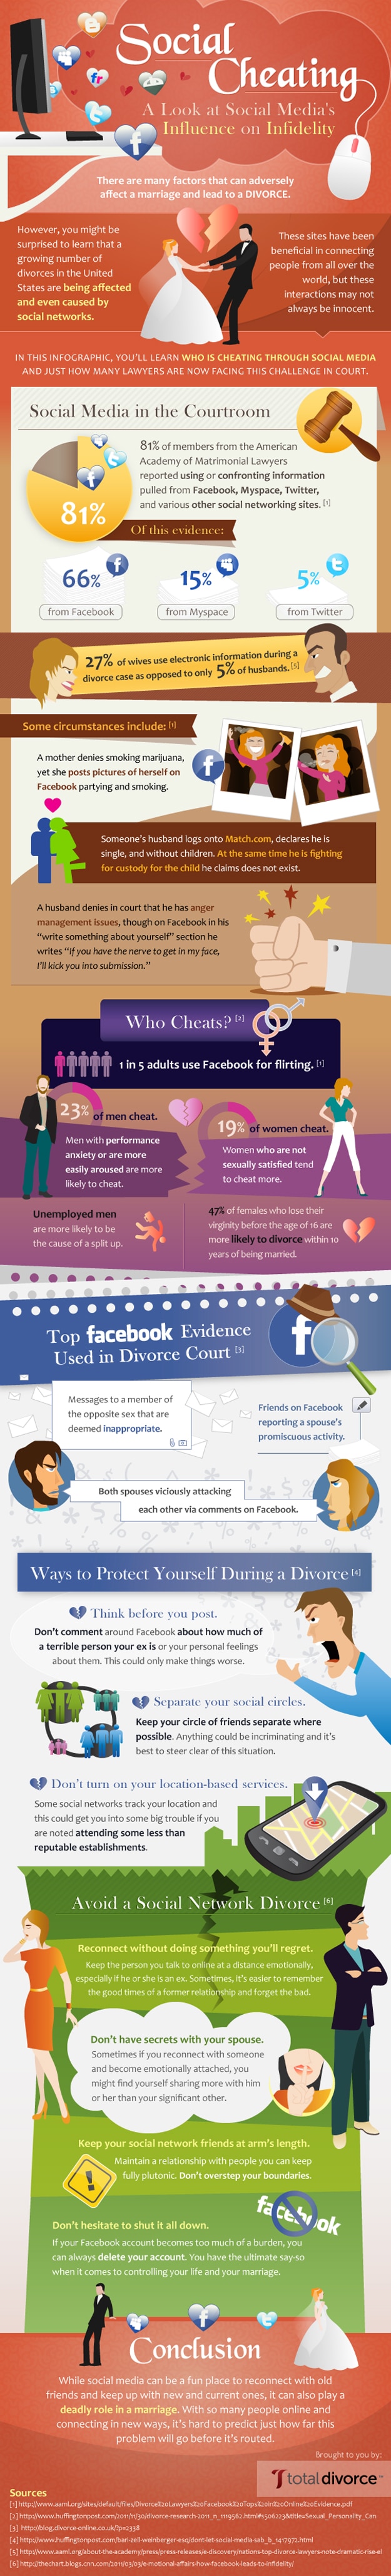 Social Cheating: How Facebook Ruins Some Marriages [Infographic]